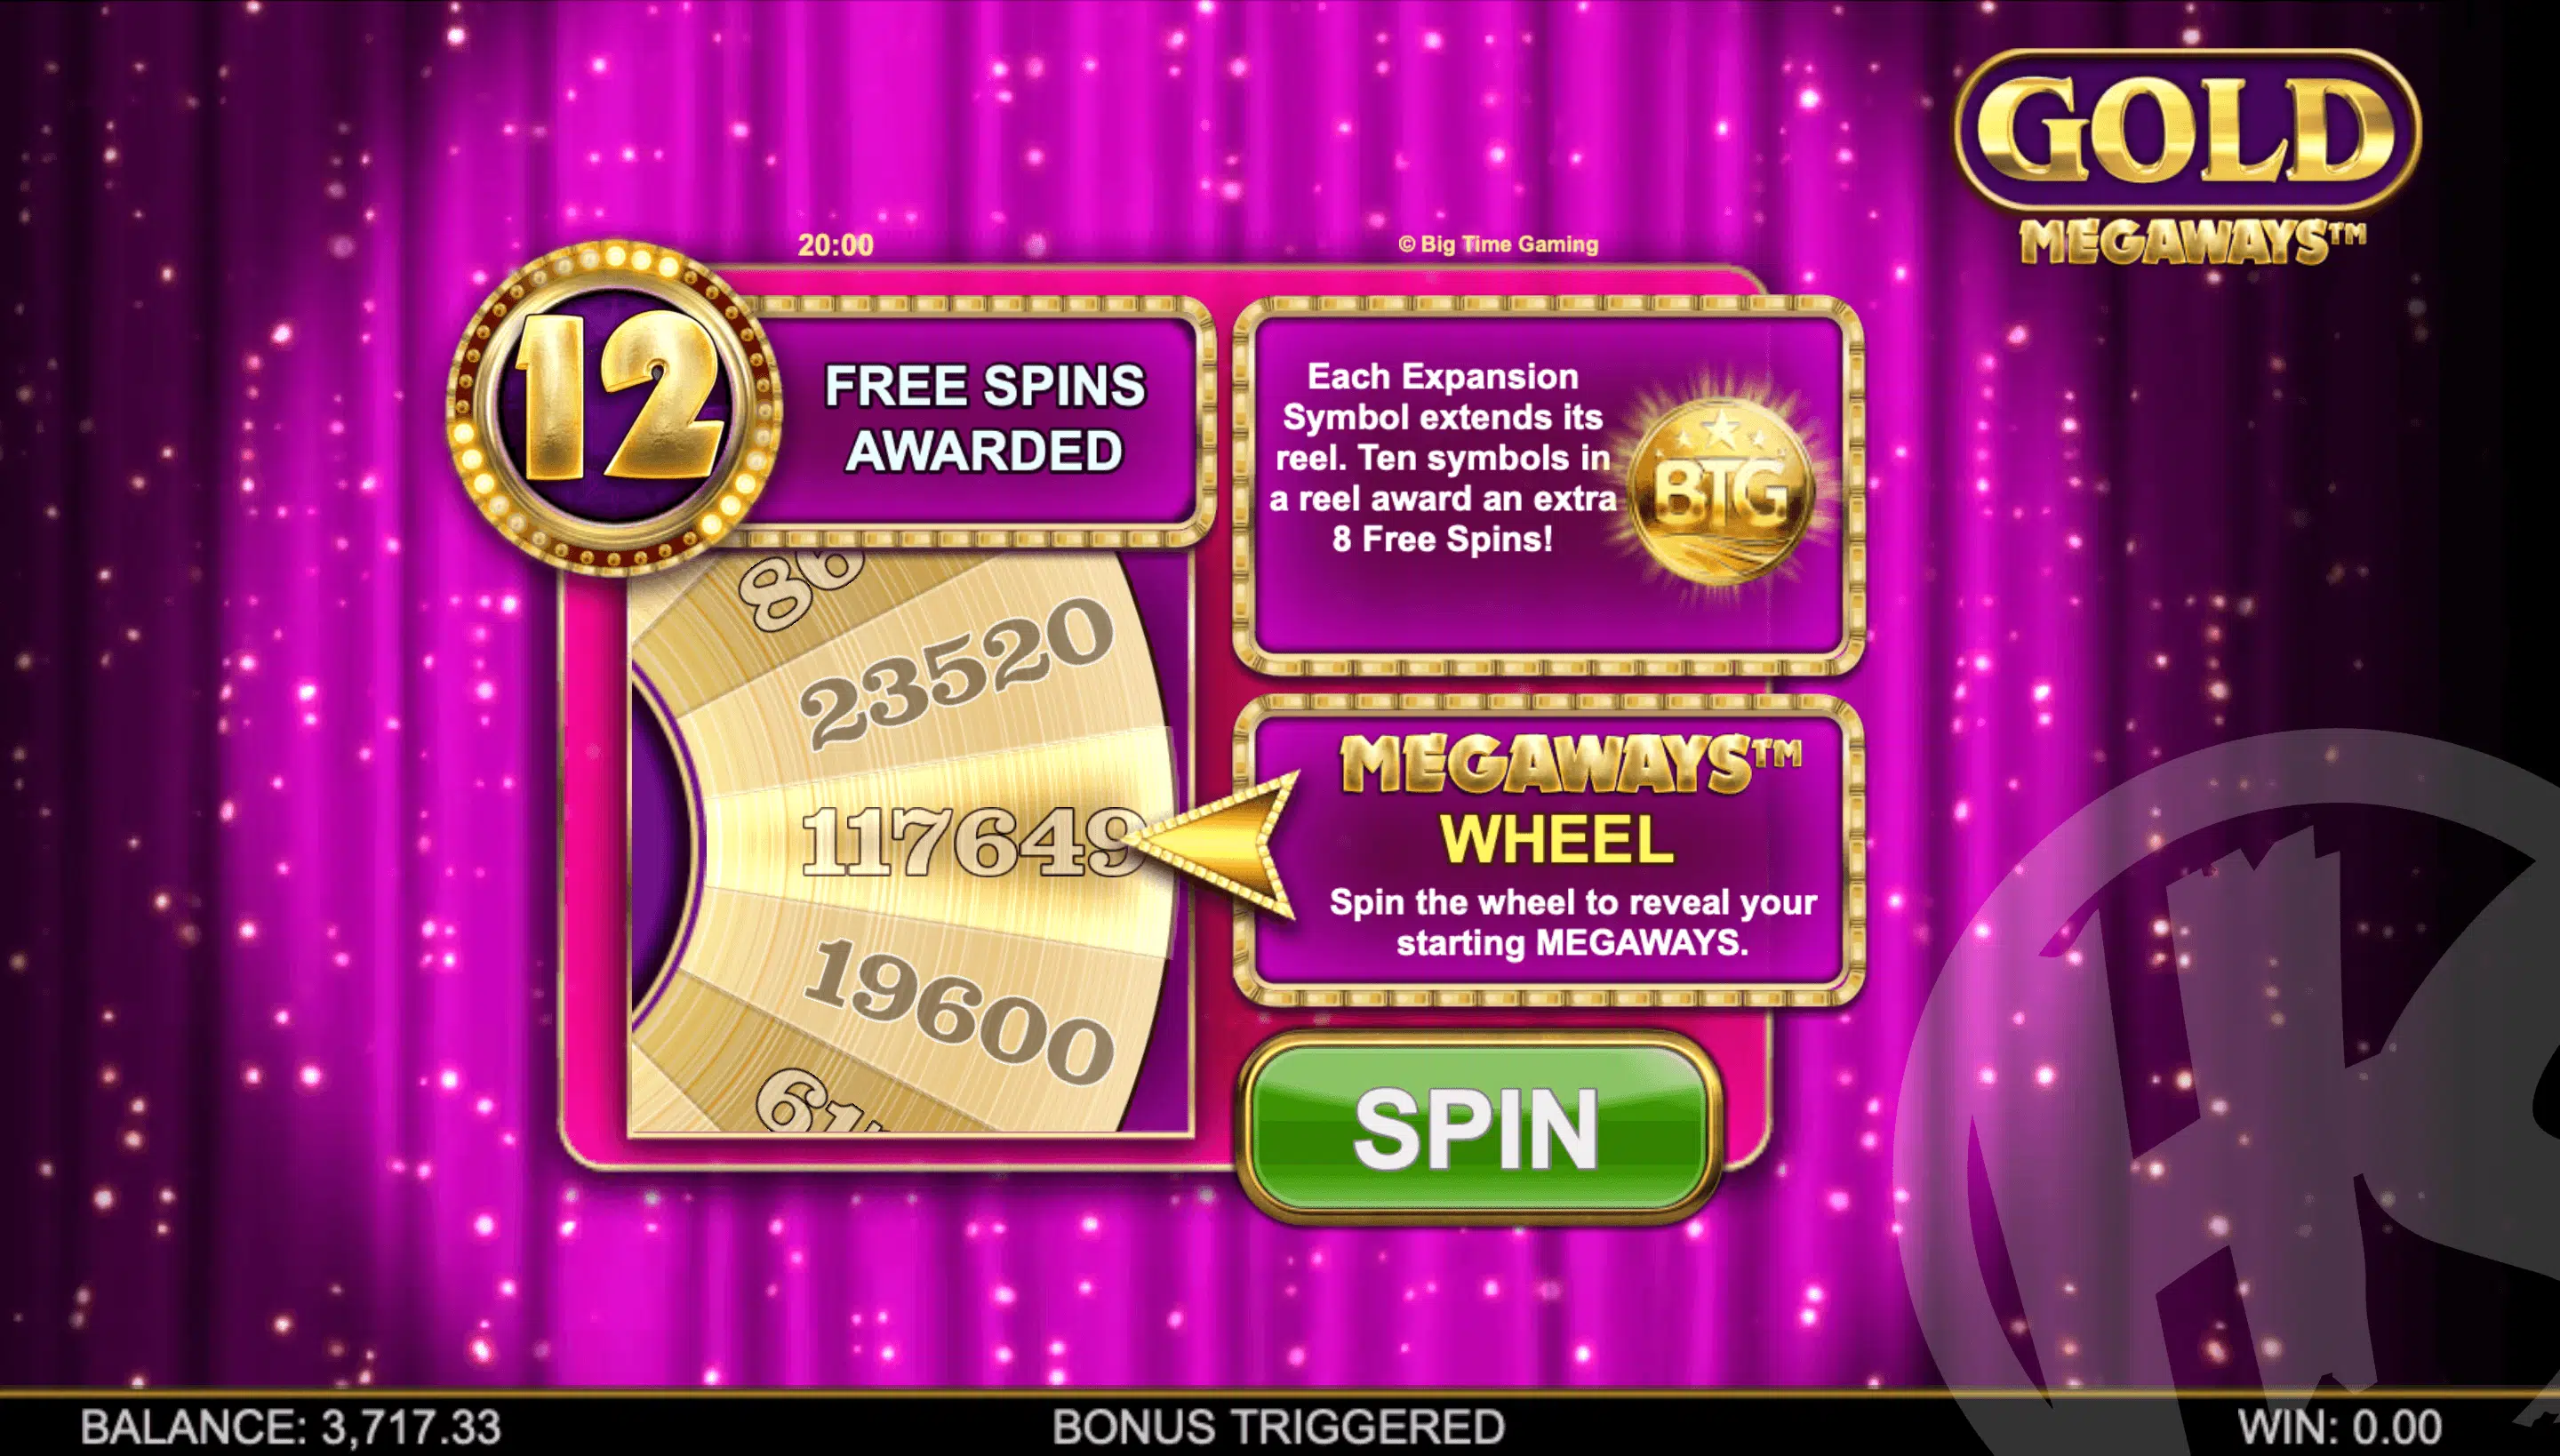 Spin The Wheel to Reveal Starting Megaways for Free Spins